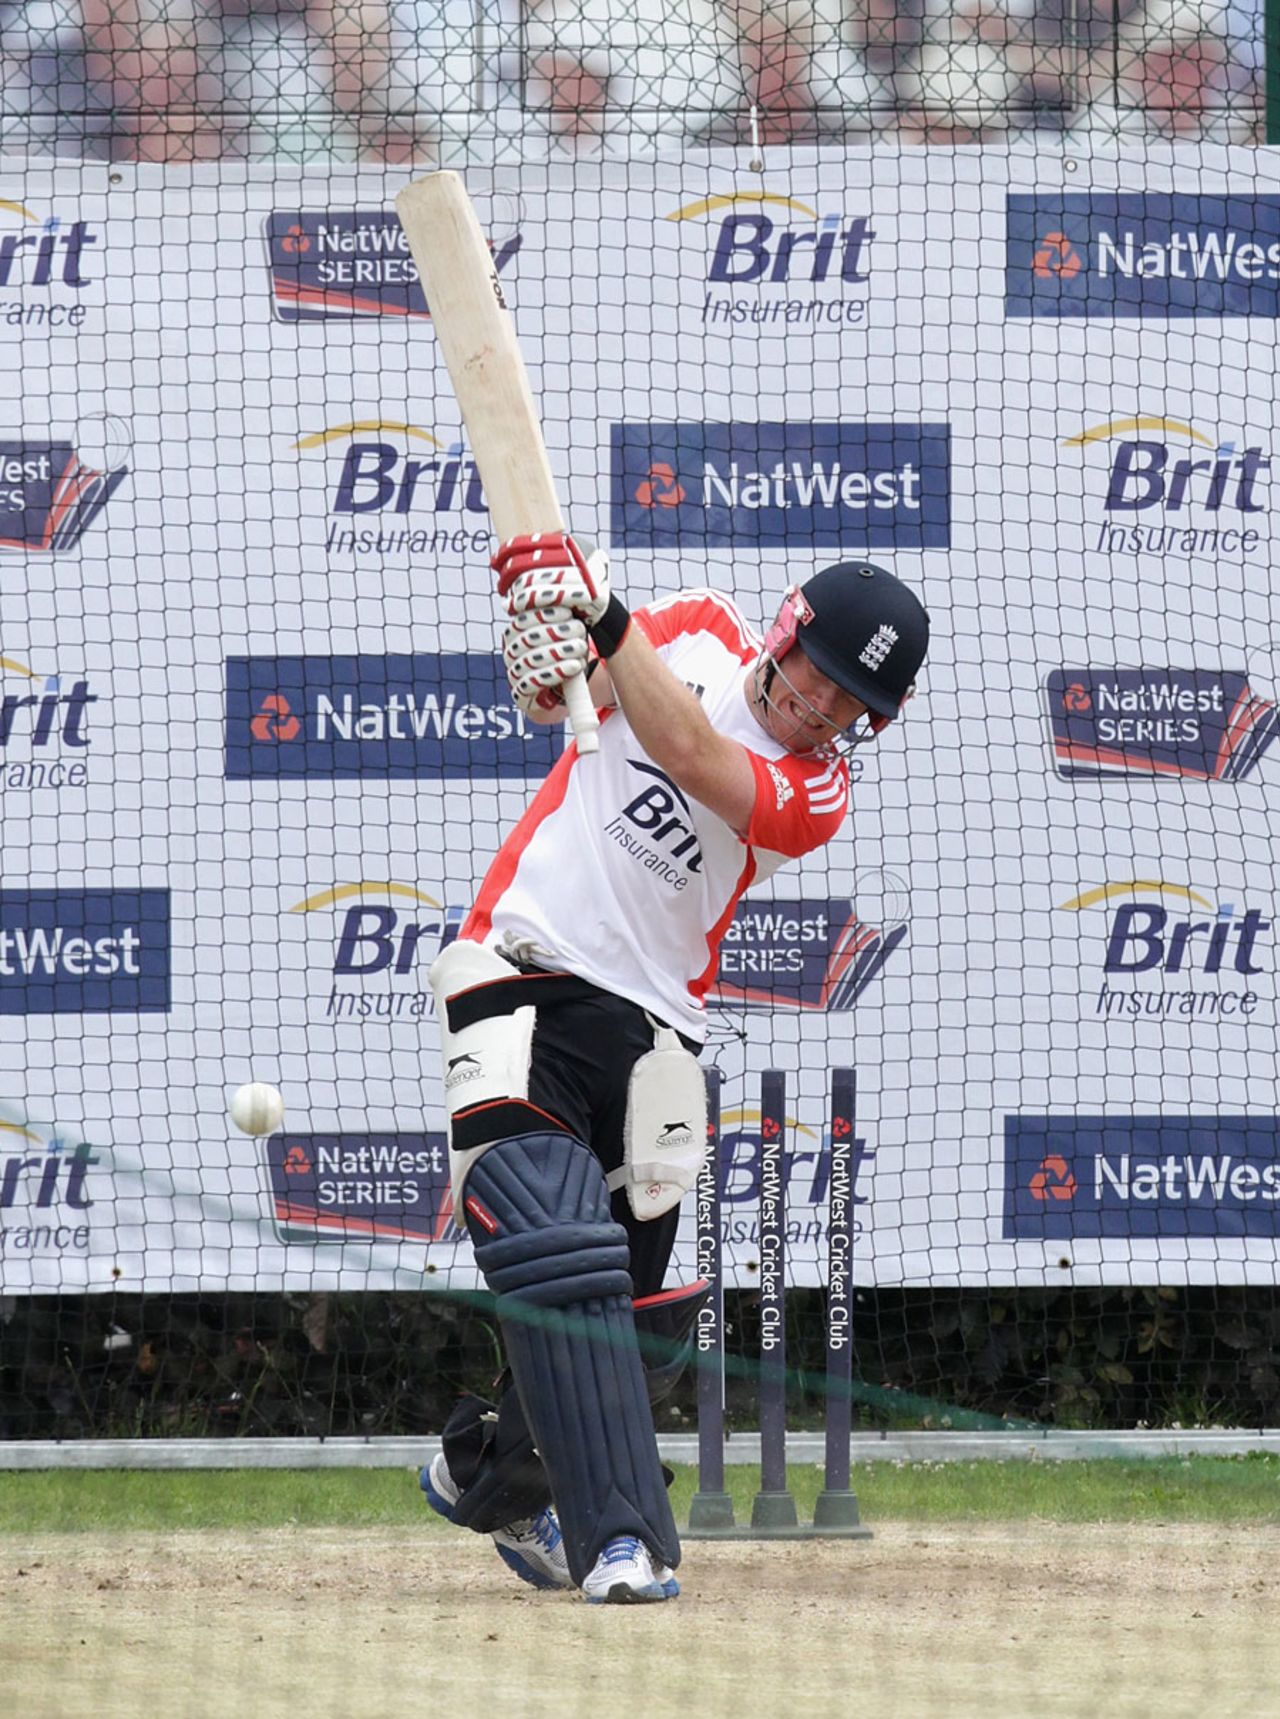 Eoin Morgan practices his big hitting ahead of the deciding ODI match at Old Trafford, July 8 2010